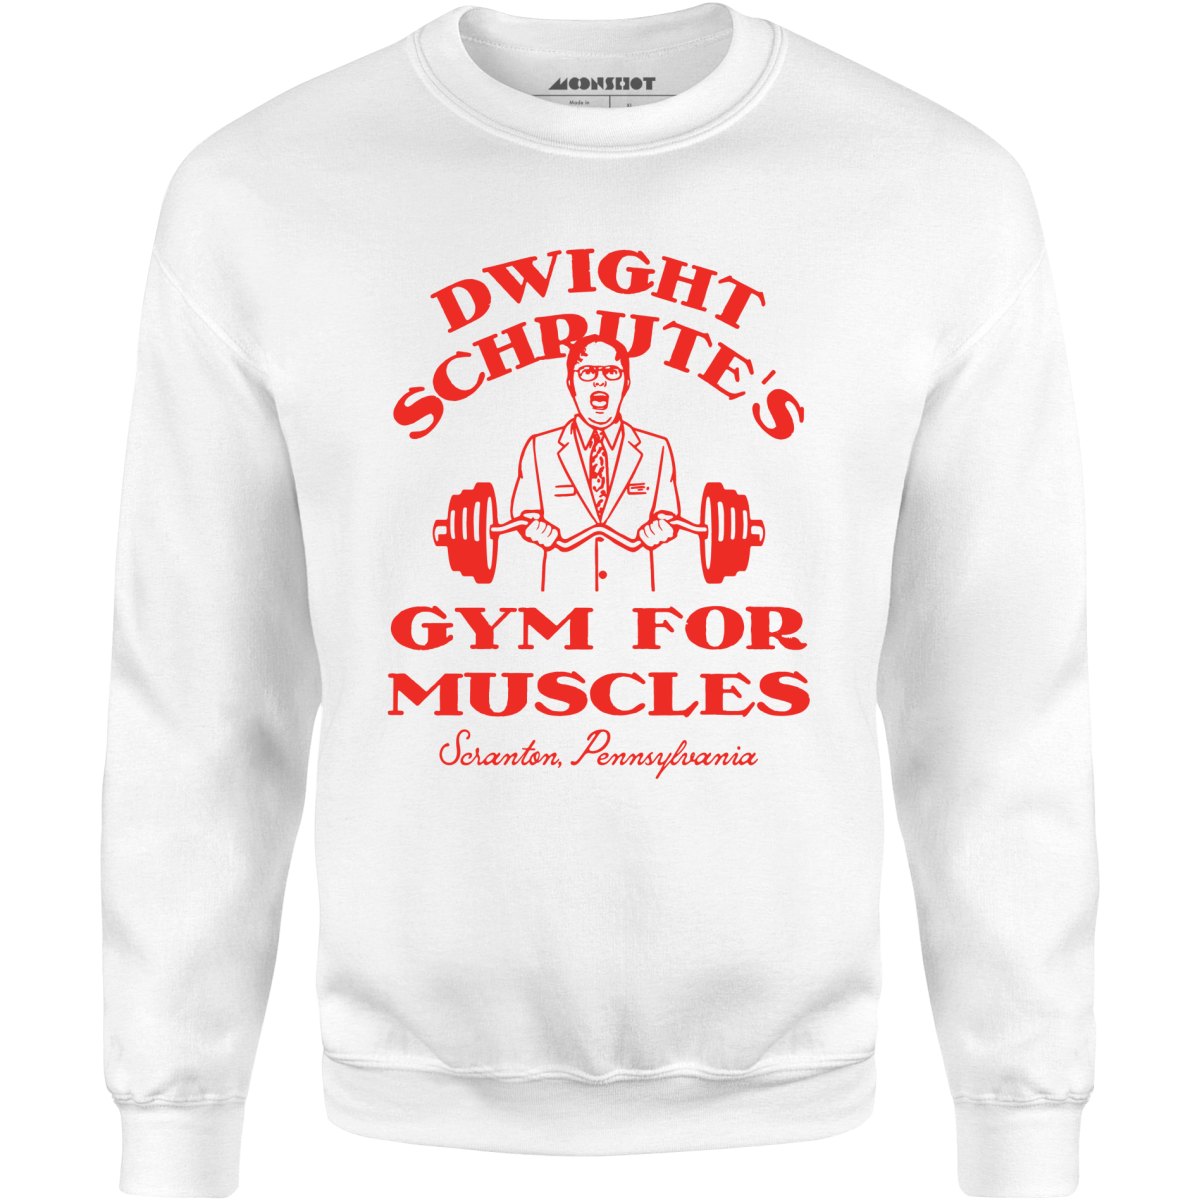 Dwight Schrute's Gym For Muscles - Unisex Sweatshirt